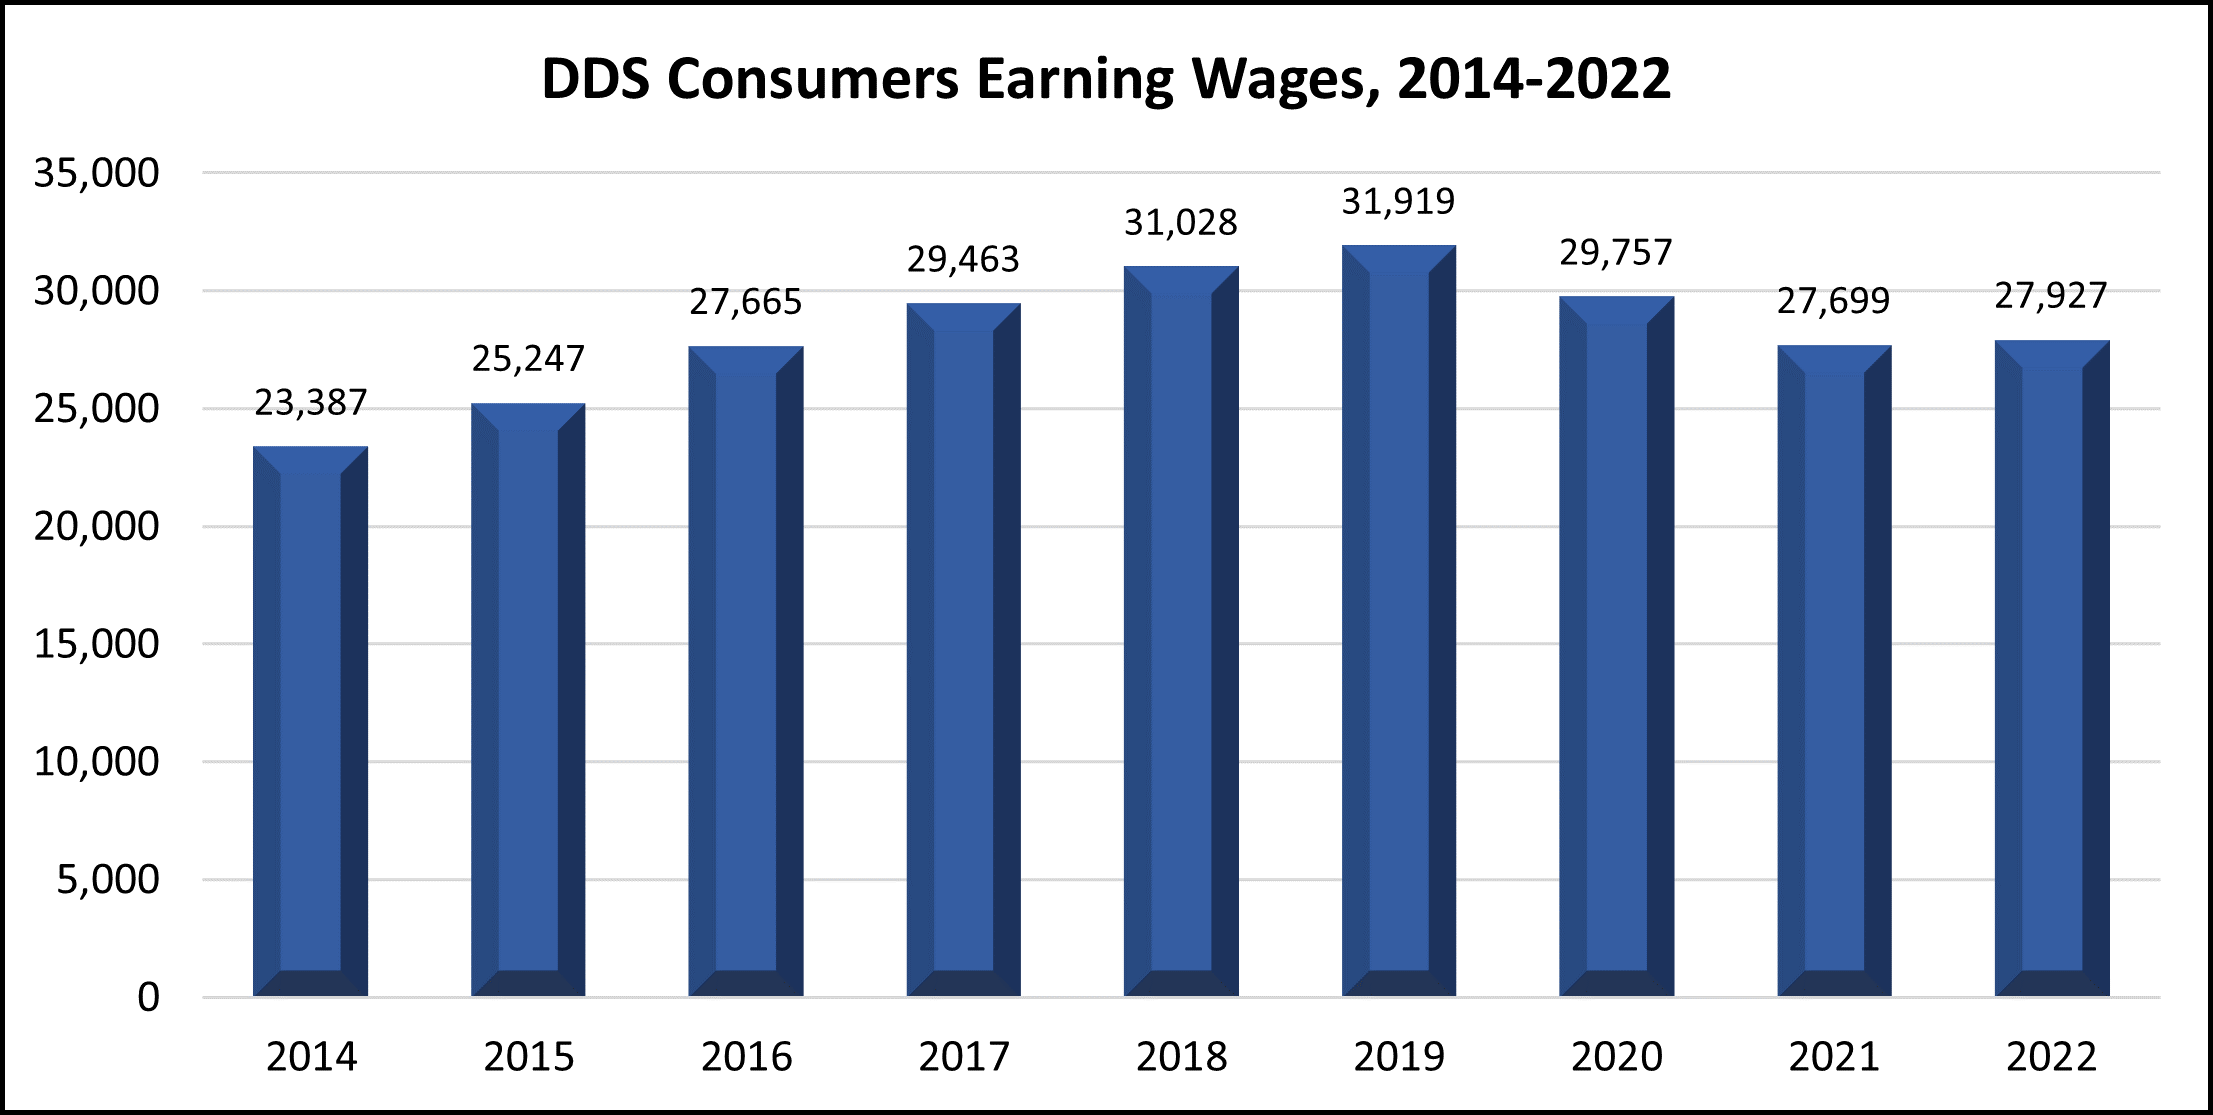 Average Number of Consumers Receiving Wages Bar Graph 2014: 23,387 2015; 25,247 2016: 27,665 2017; 29,463 2018: 31,028 2019: 31,919 2020:29,757 2021: 27,699 2022: 27,927